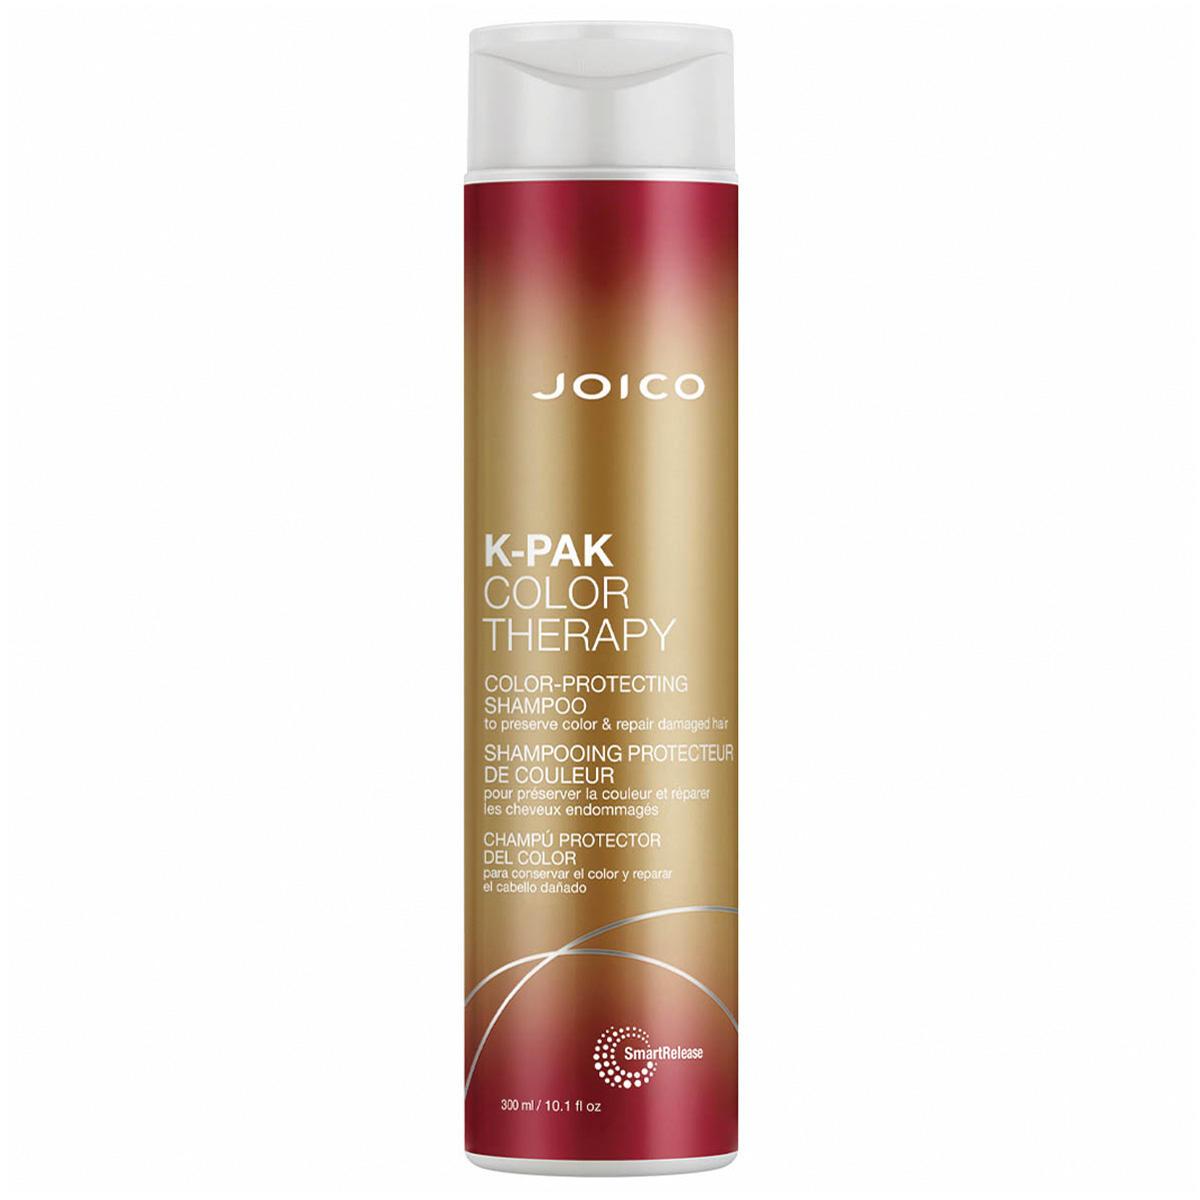 JOICO K-PAK Color Therapy Color-Protecting Shampoo  - 1